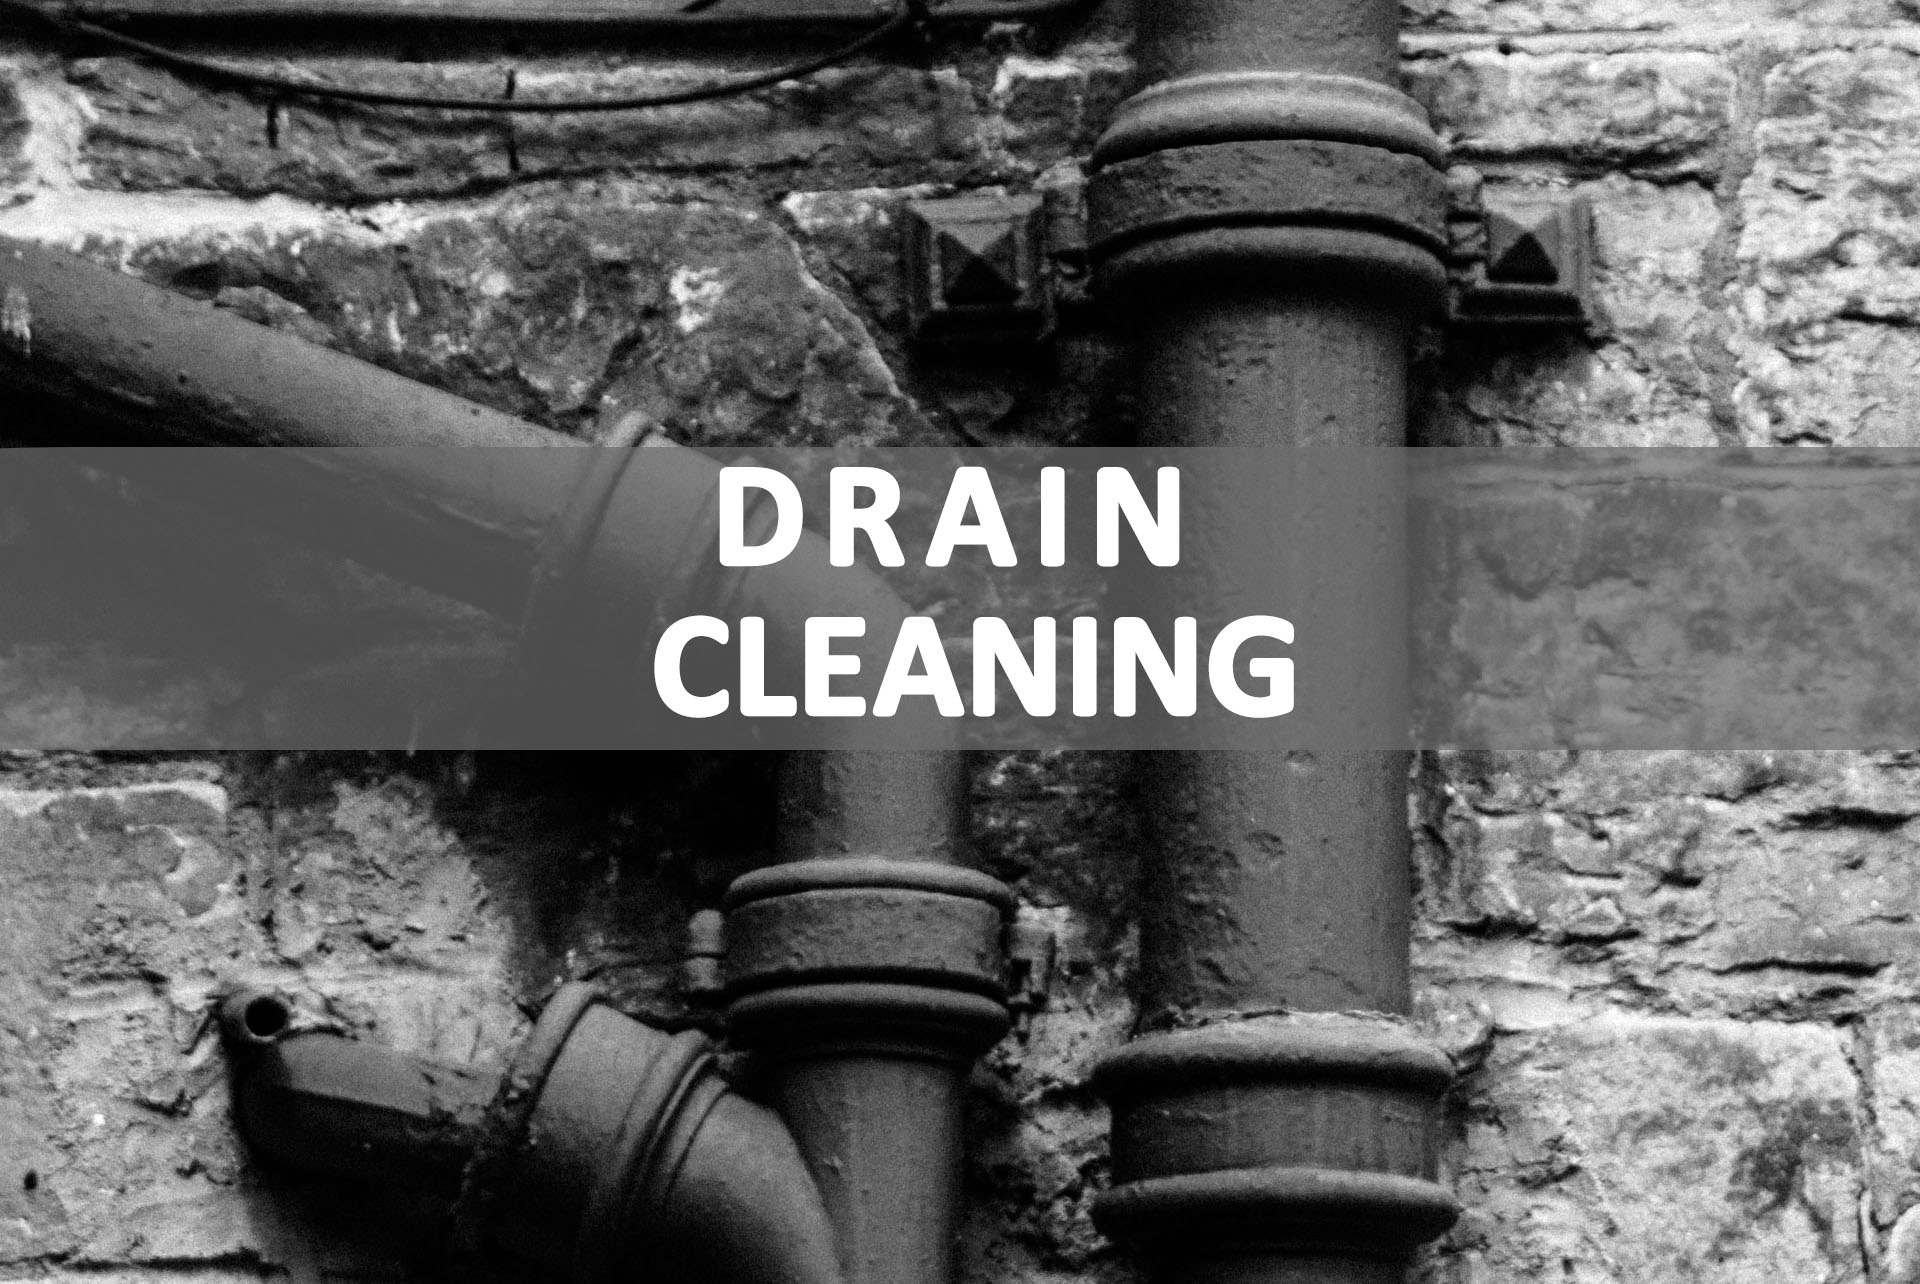 drain cleaning nfort myers kitchen sink